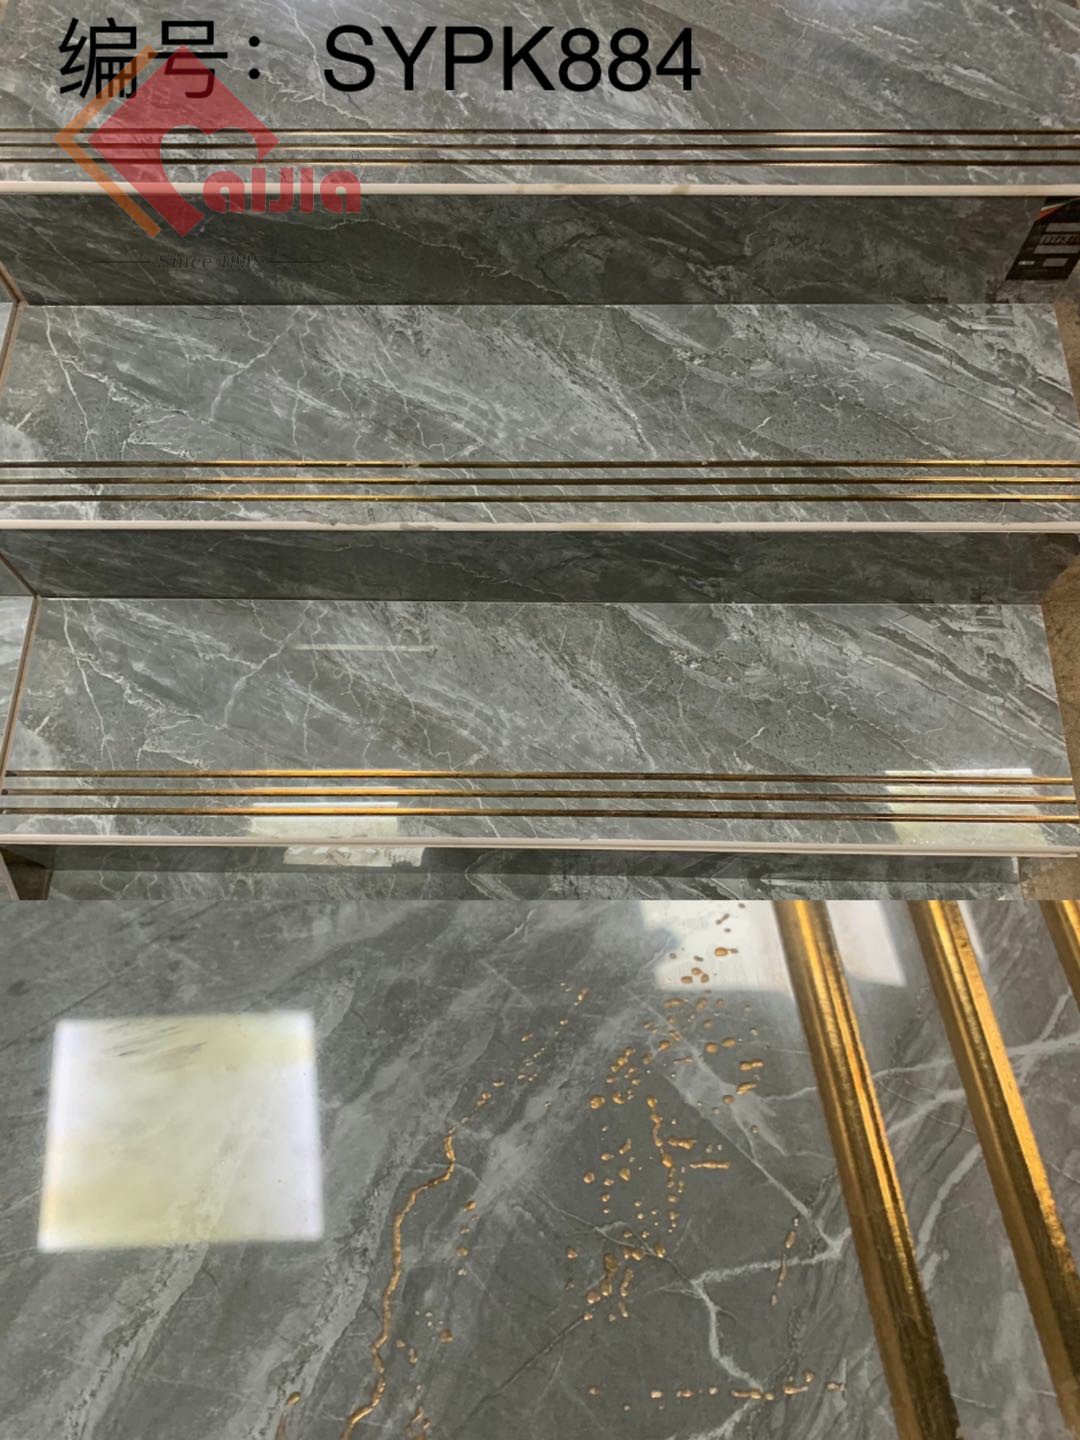 1200X470X11.5 With Gold Or Silver AJSYPK884